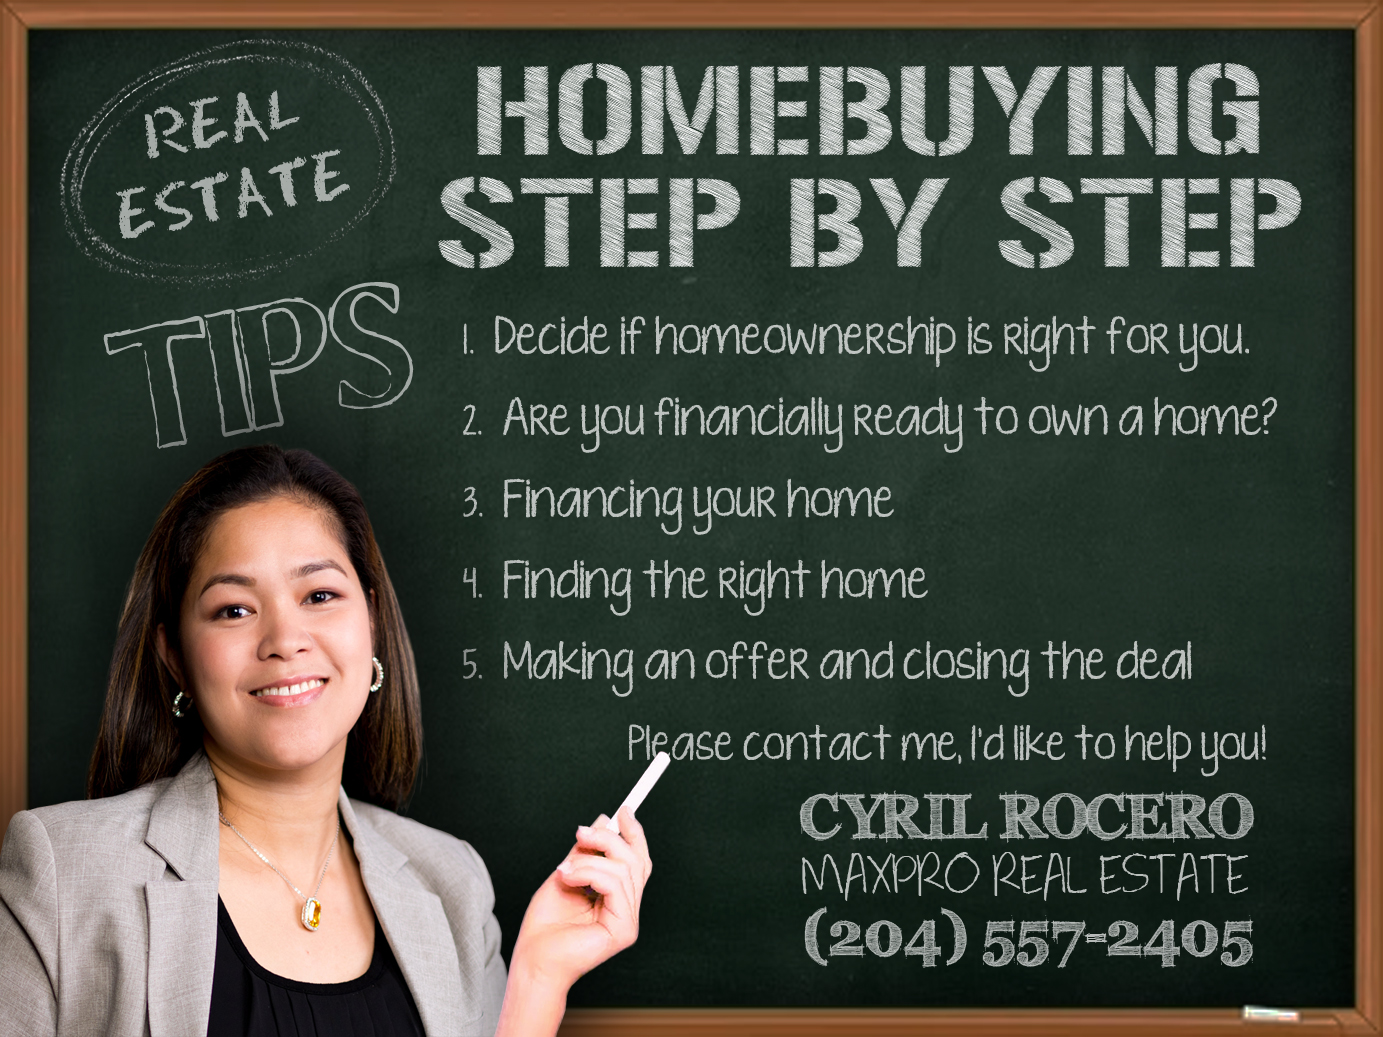 HOMEBUYING STEP BY STEP - Your Guide to Buying a Home in Canada - With Cyril Rocero - MaxPro Real Estate - Winnipeg Realtor